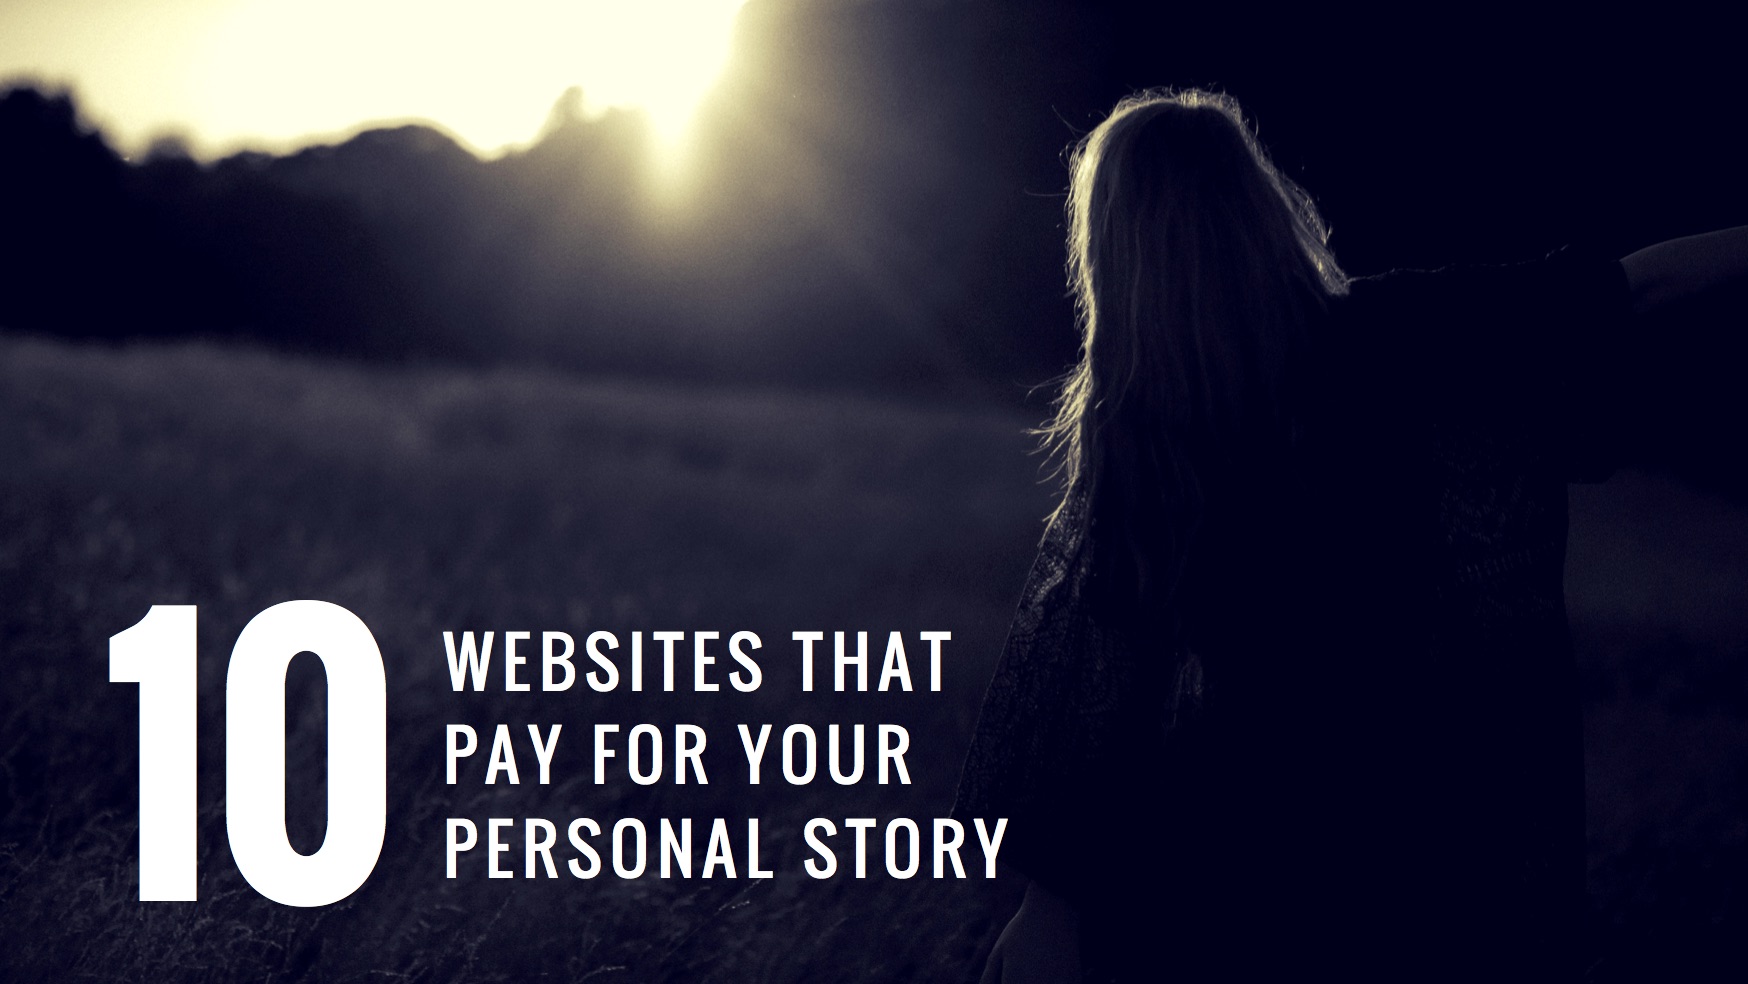 Get paid to write your personal story.